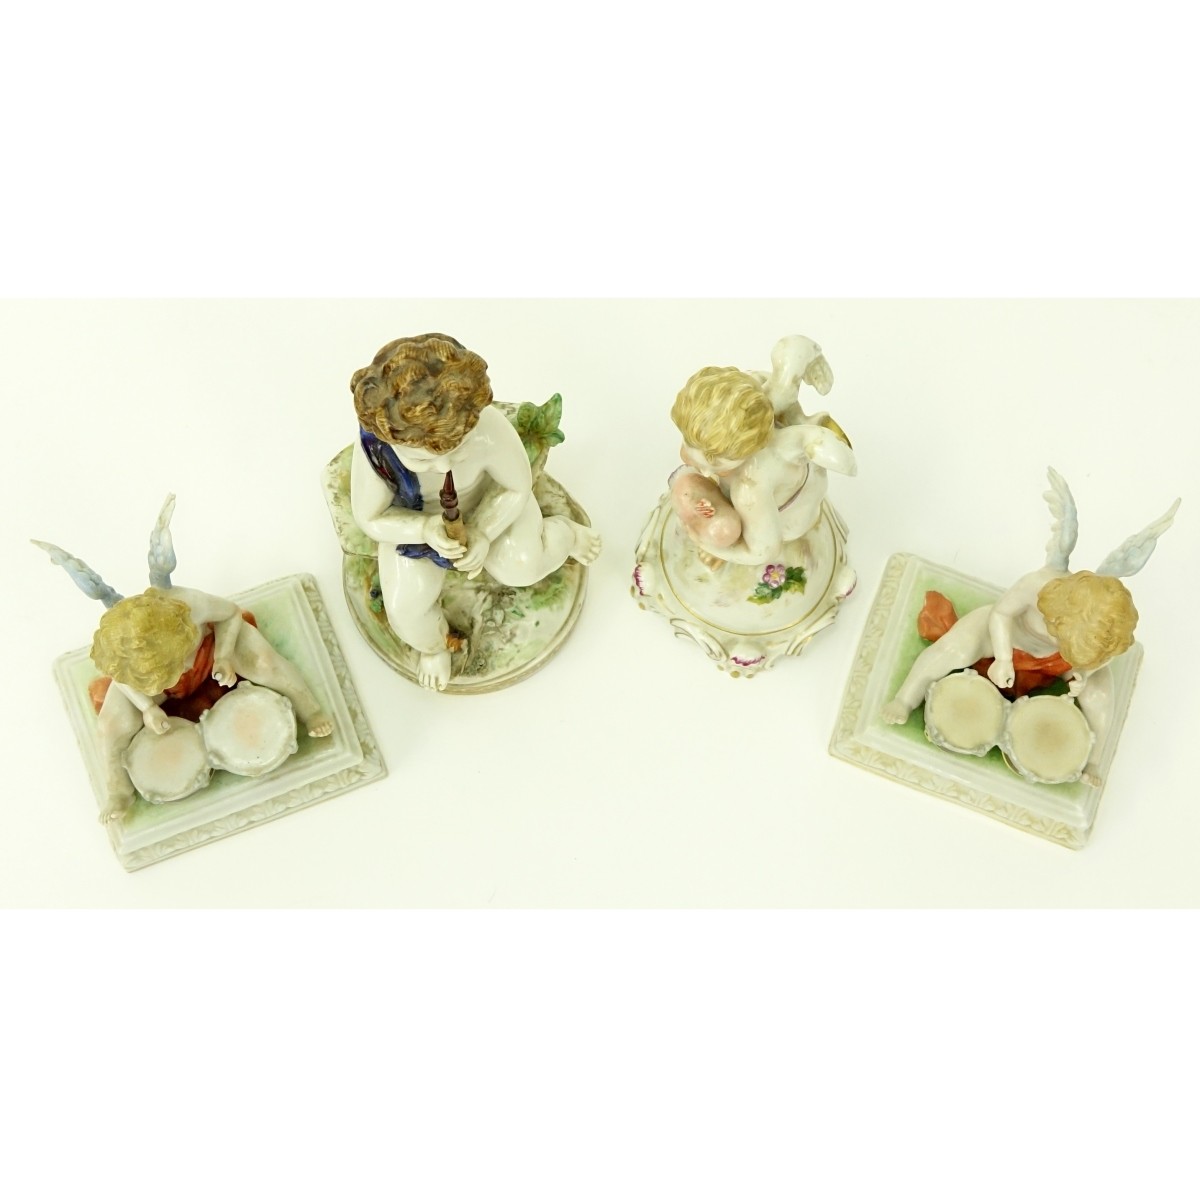 Grouping of Four (4) Antique Porcelain Figurines